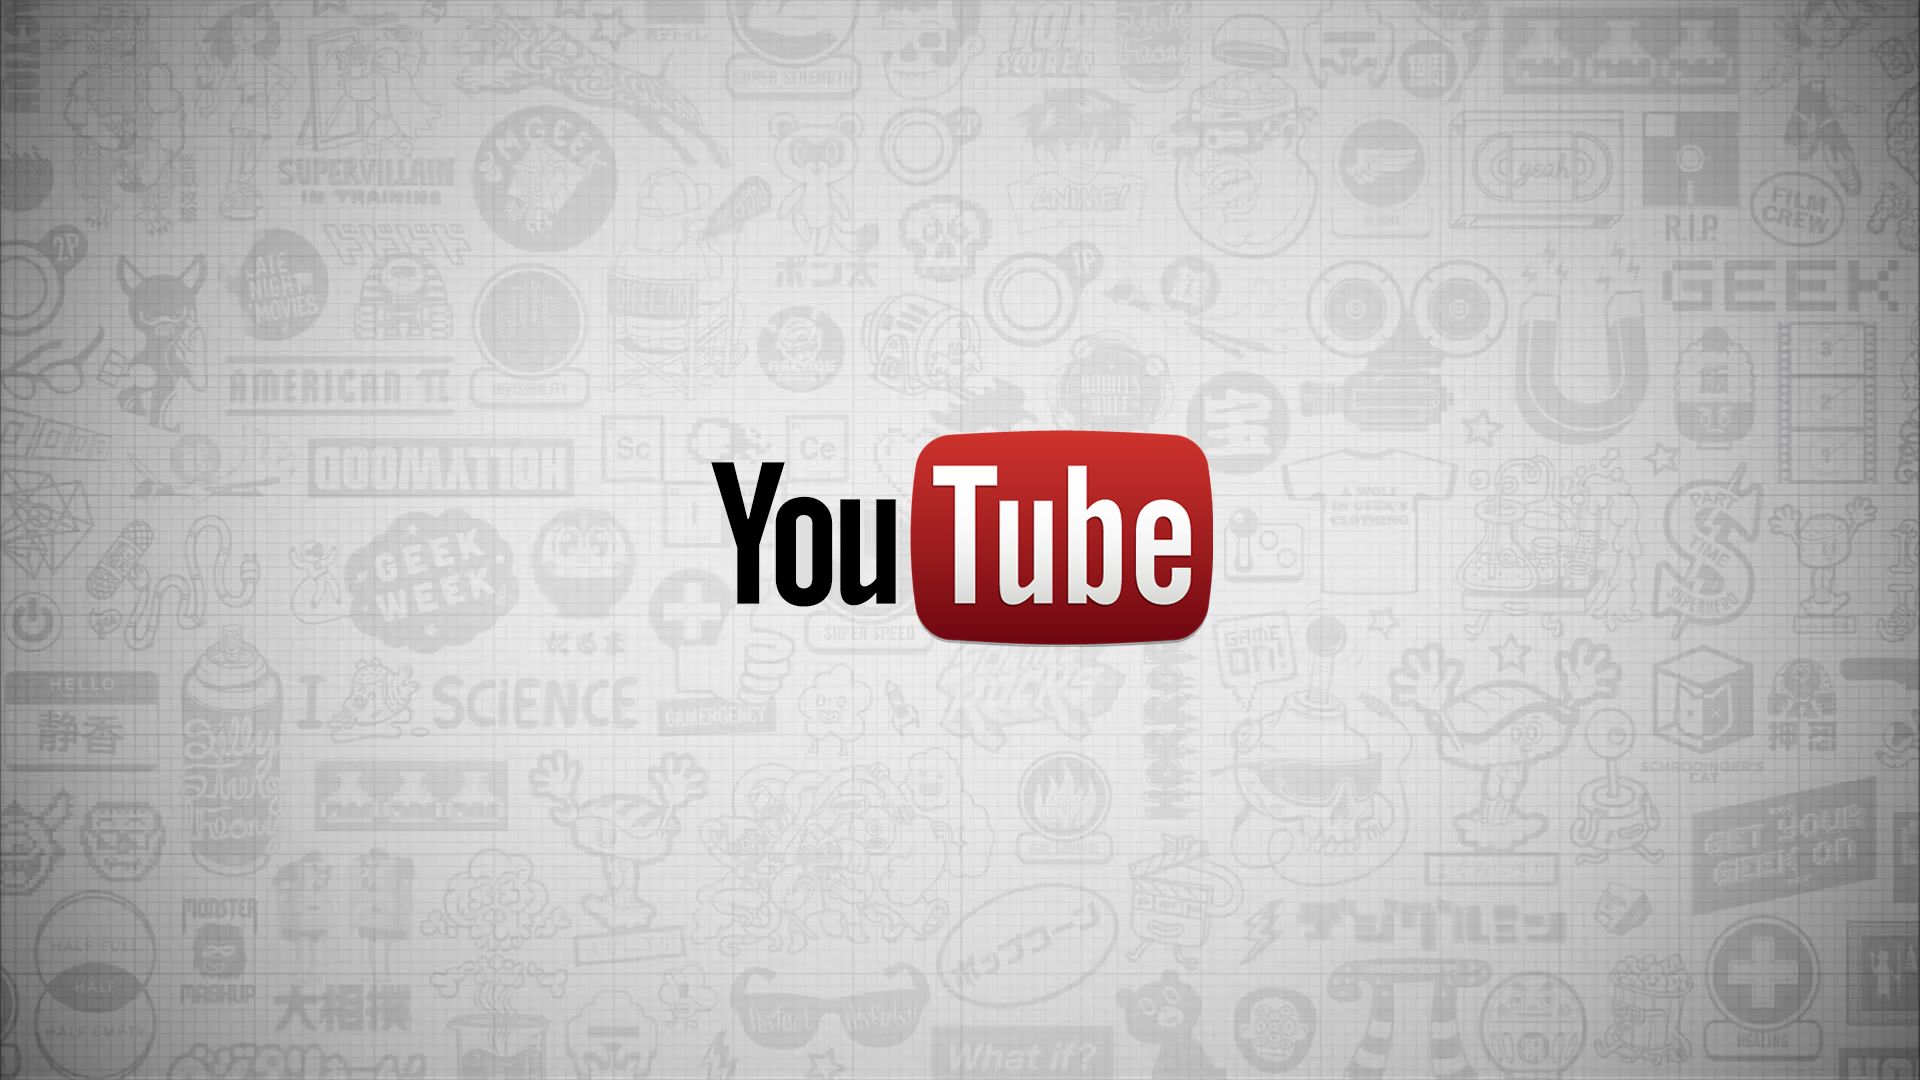 YouTube Tools to Boost Your Content Marketing Efforts. Basem Bitar. Online Marketing & Technology Blogx1152 wallpaper, Youtube facts, Youtube logo